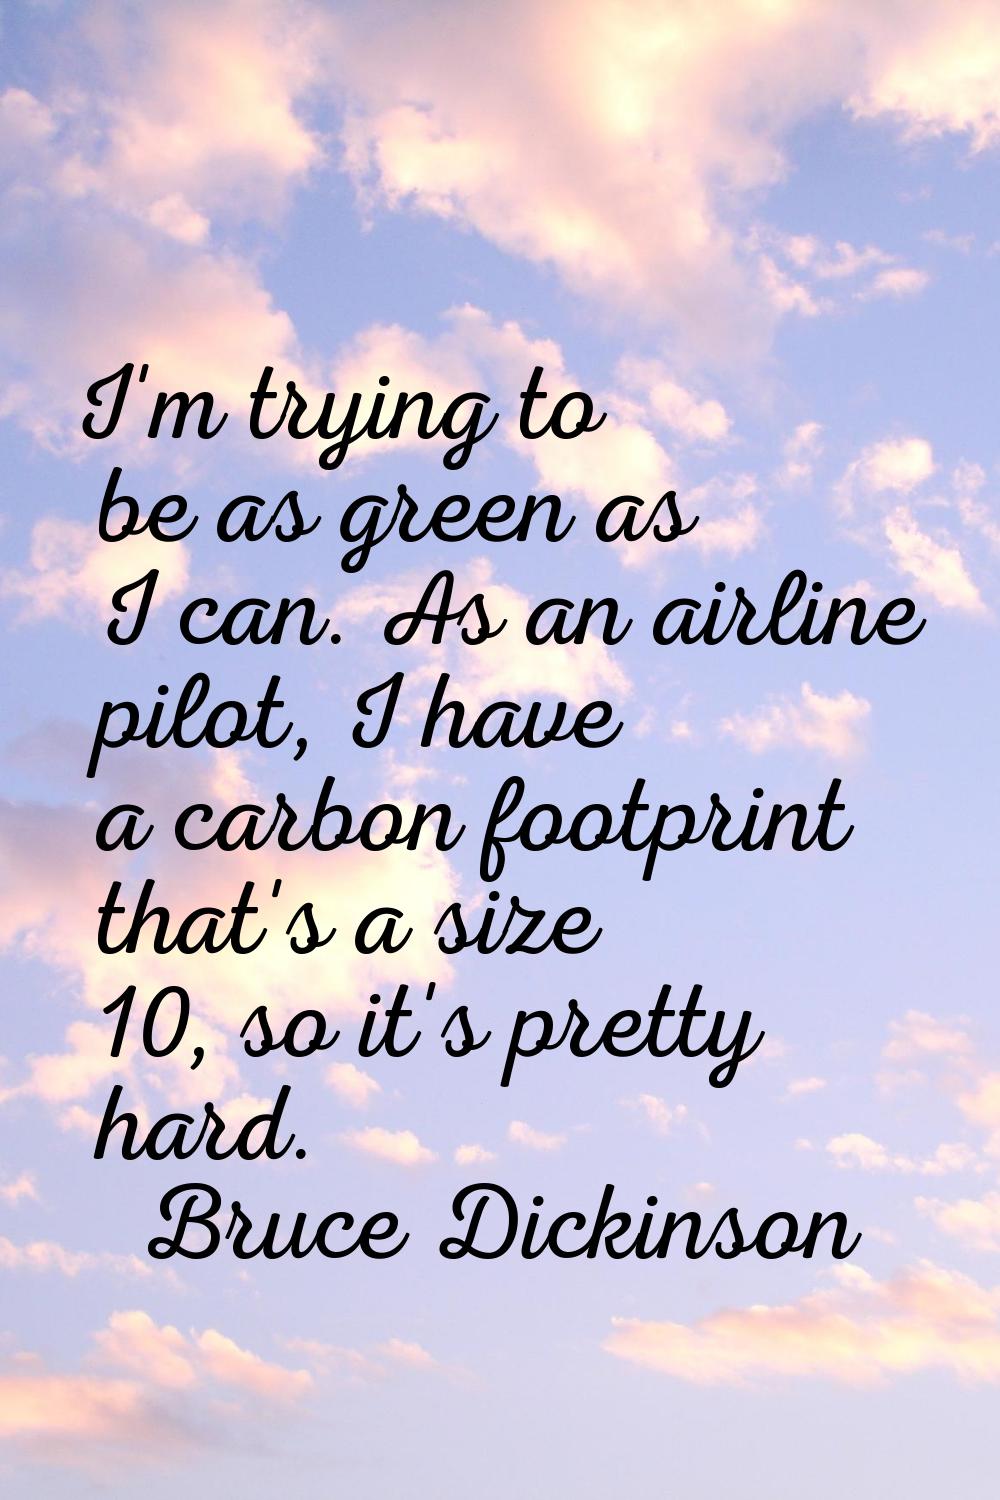 I'm trying to be as green as I can. As an airline pilot, I have a carbon footprint that's a size 10